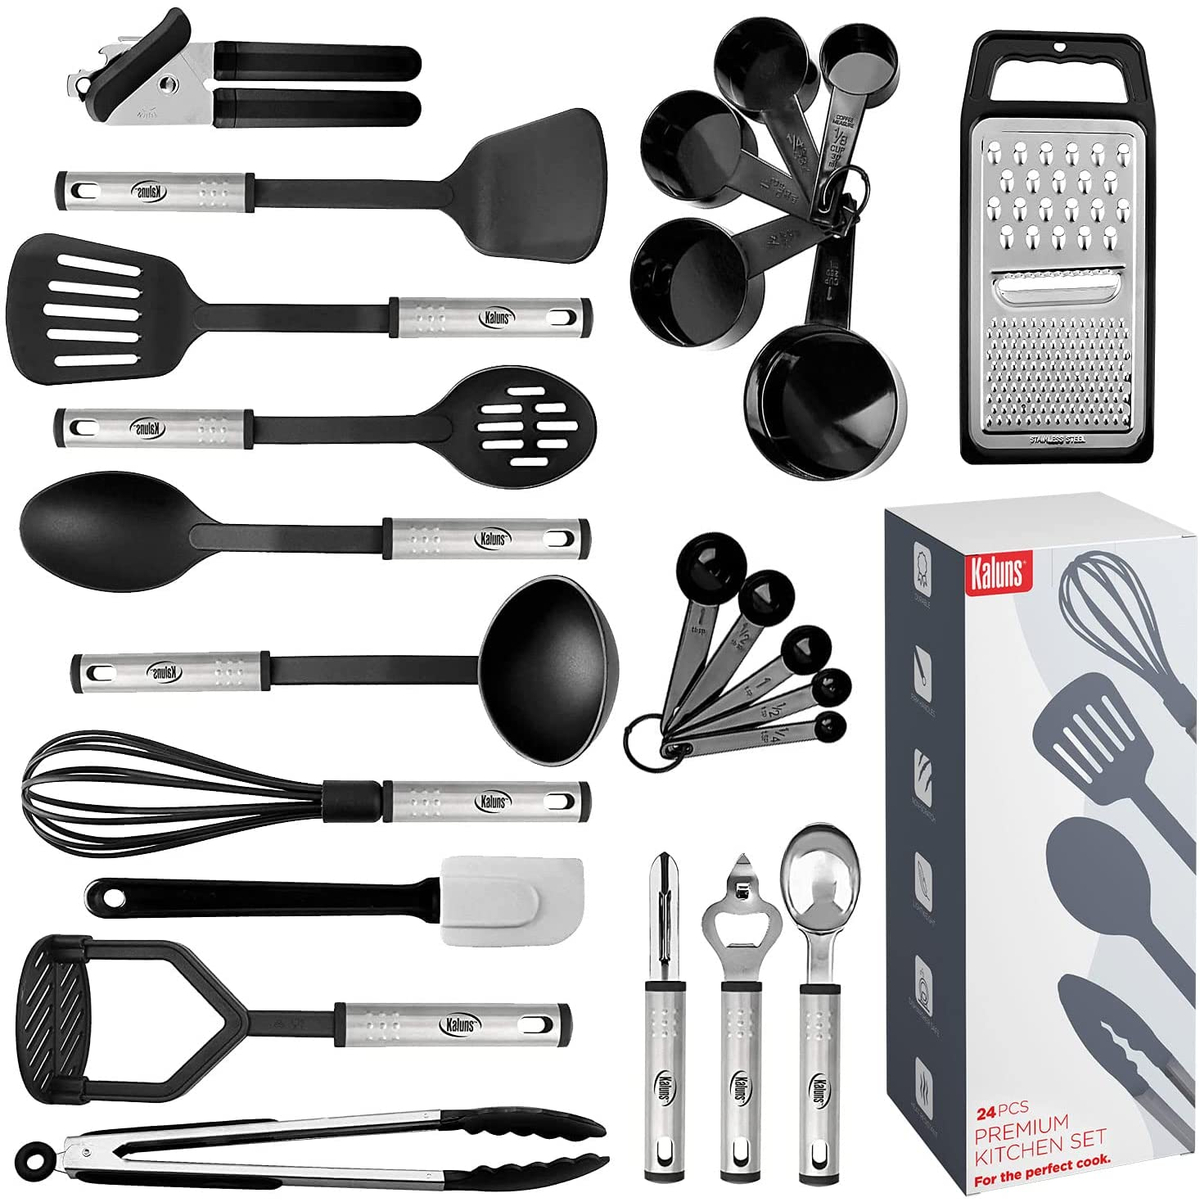 This 24-Piece Kitchen Utensil Set on Amazon Is on Sale Now for $19